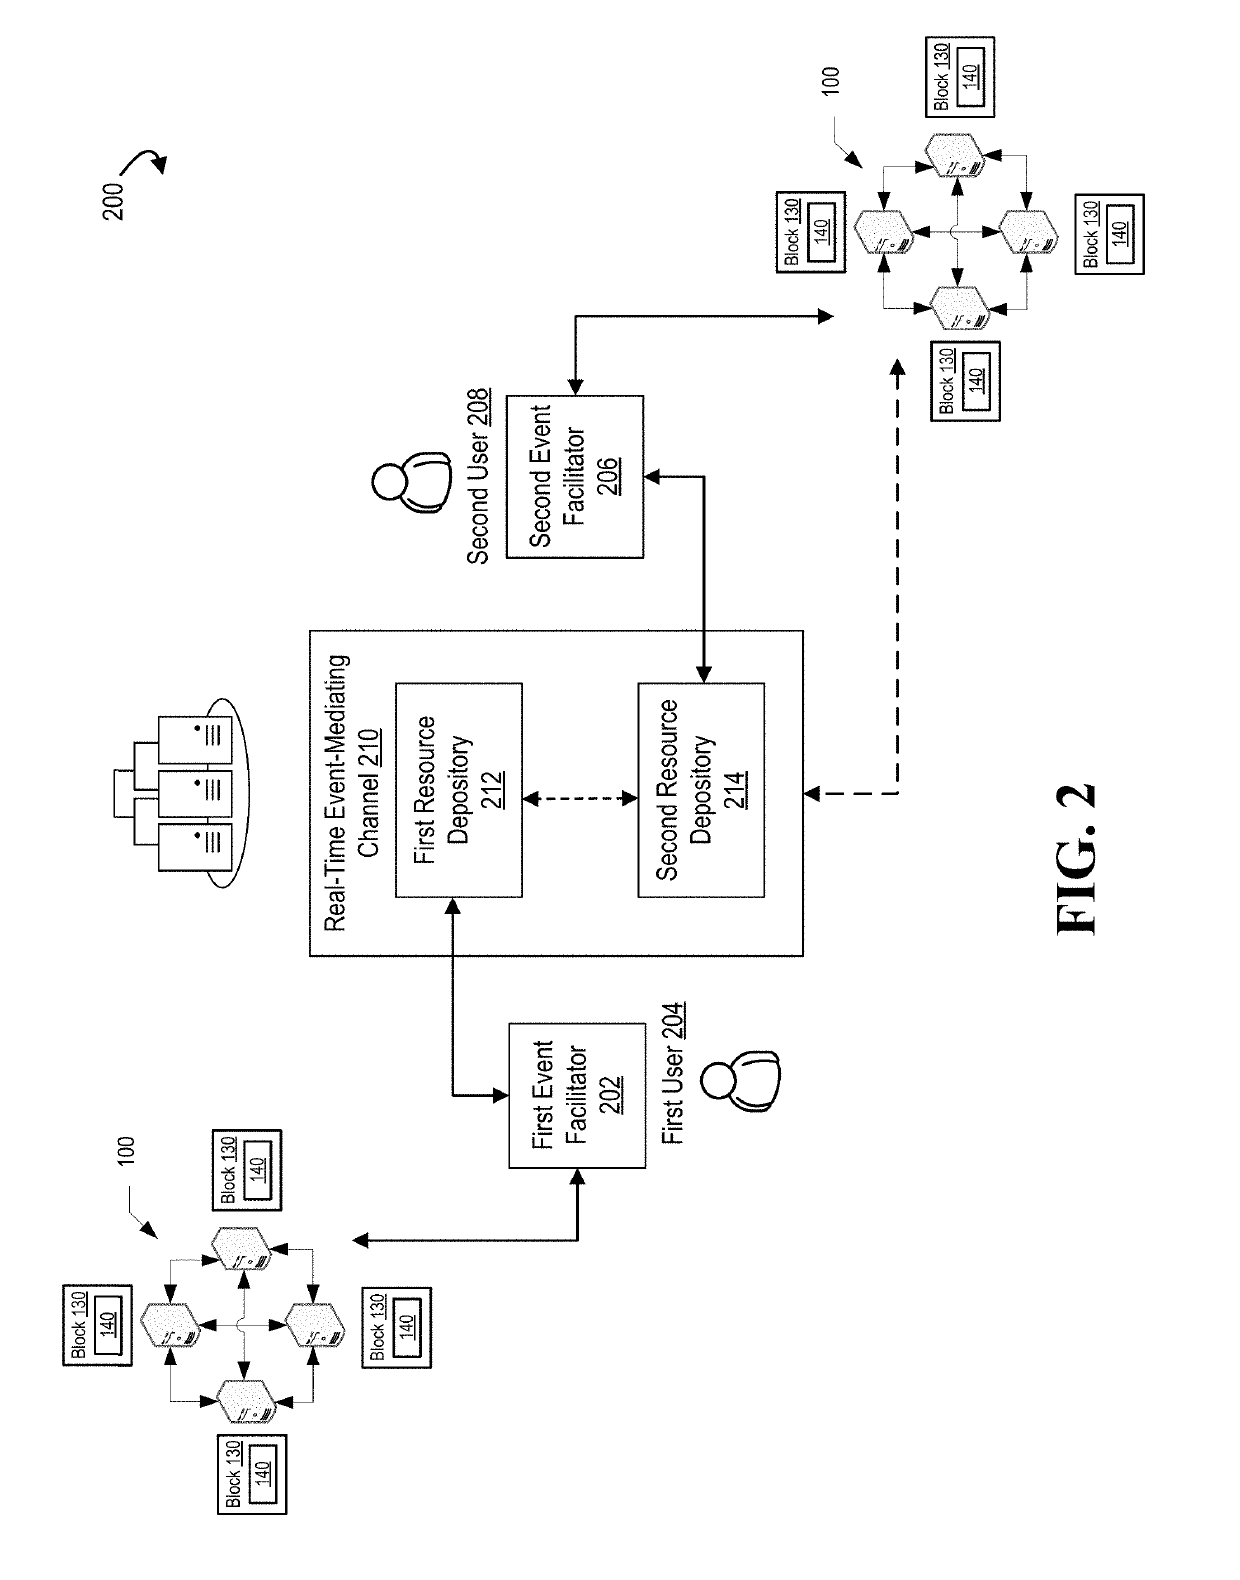 Internet-of-things enabled real-time event processing